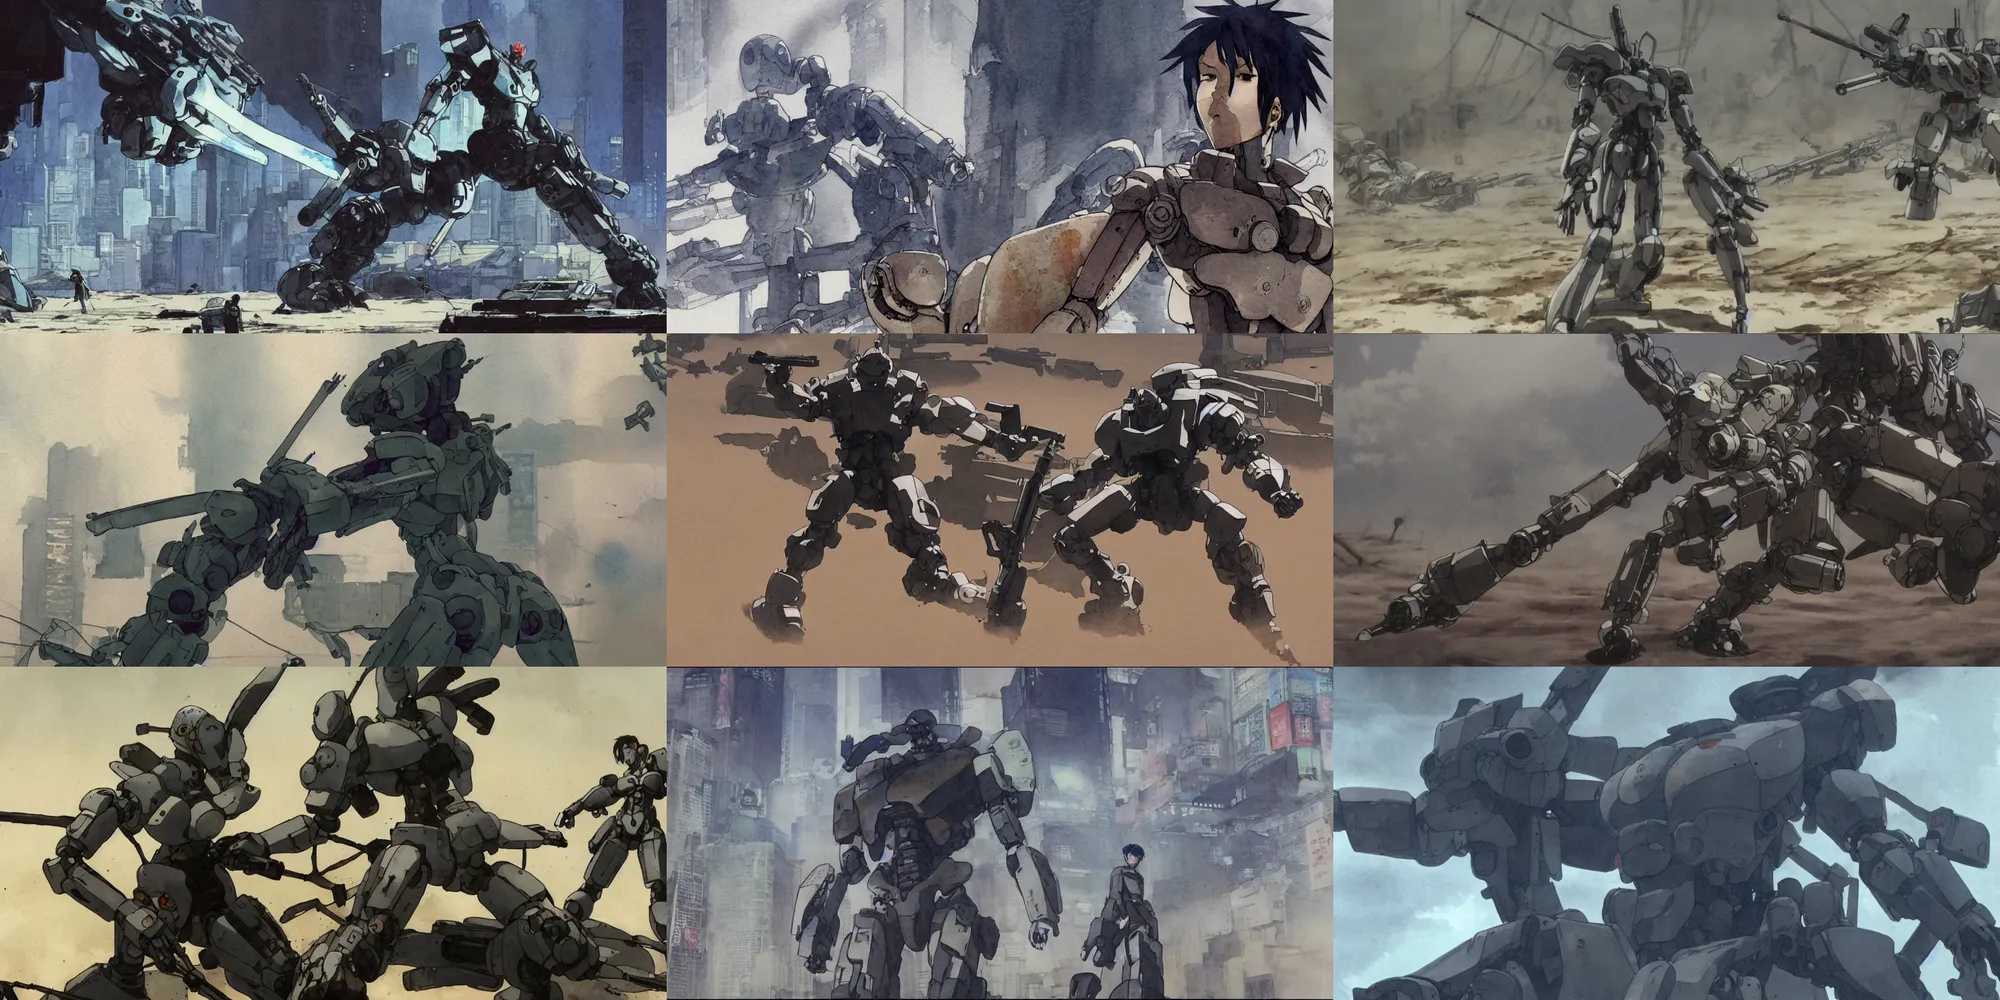 Prompt: incredible screenshot, simple watercolor, masamune shirow ghost in the shell movie scene close up broken Kusanagi tank battle, uncovering a rusting Yoji Shinkawa robot ribcage and spine poking out of sand dunes, giant robot hand, cracks, brown mud, dust, impossible geometry, falling apart, take cover, bullet holes,last man standing, memorable scene, red, blue, orange, cool hair, melting, danger, death, chaos, bodies on the ground, heavy rain, pipes, metalic reflections, refraction, bounce light, phil hale, rim light, bokeh ,hd, 4k, remaster, dynamic camera angle, deep 3 point perspective, fish eye, dynamic scene